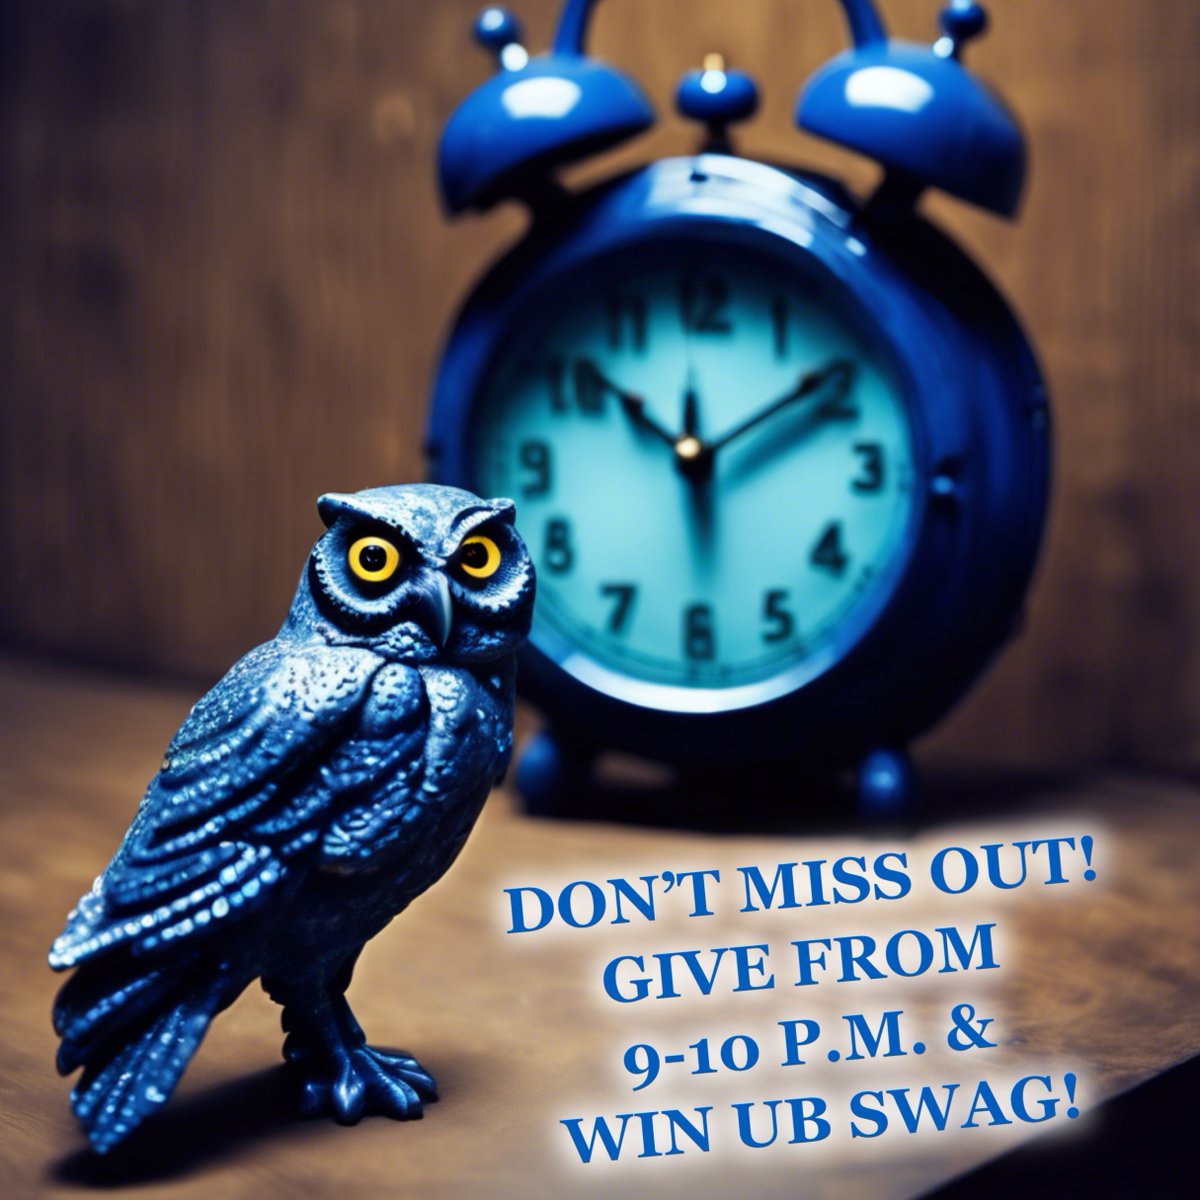 Calling all night owls in the @Jacobs_Med_UB community! It’s almost 9 p.m., & that’s important if you want to win UB swag! In honor of the 10th Annual #UBGivingDay, make a gift of $10.00+ TONIGHT between 9-10 p.m. & get #UBuffalo branded swag. Donate now: buff.ly/4aXjRYr